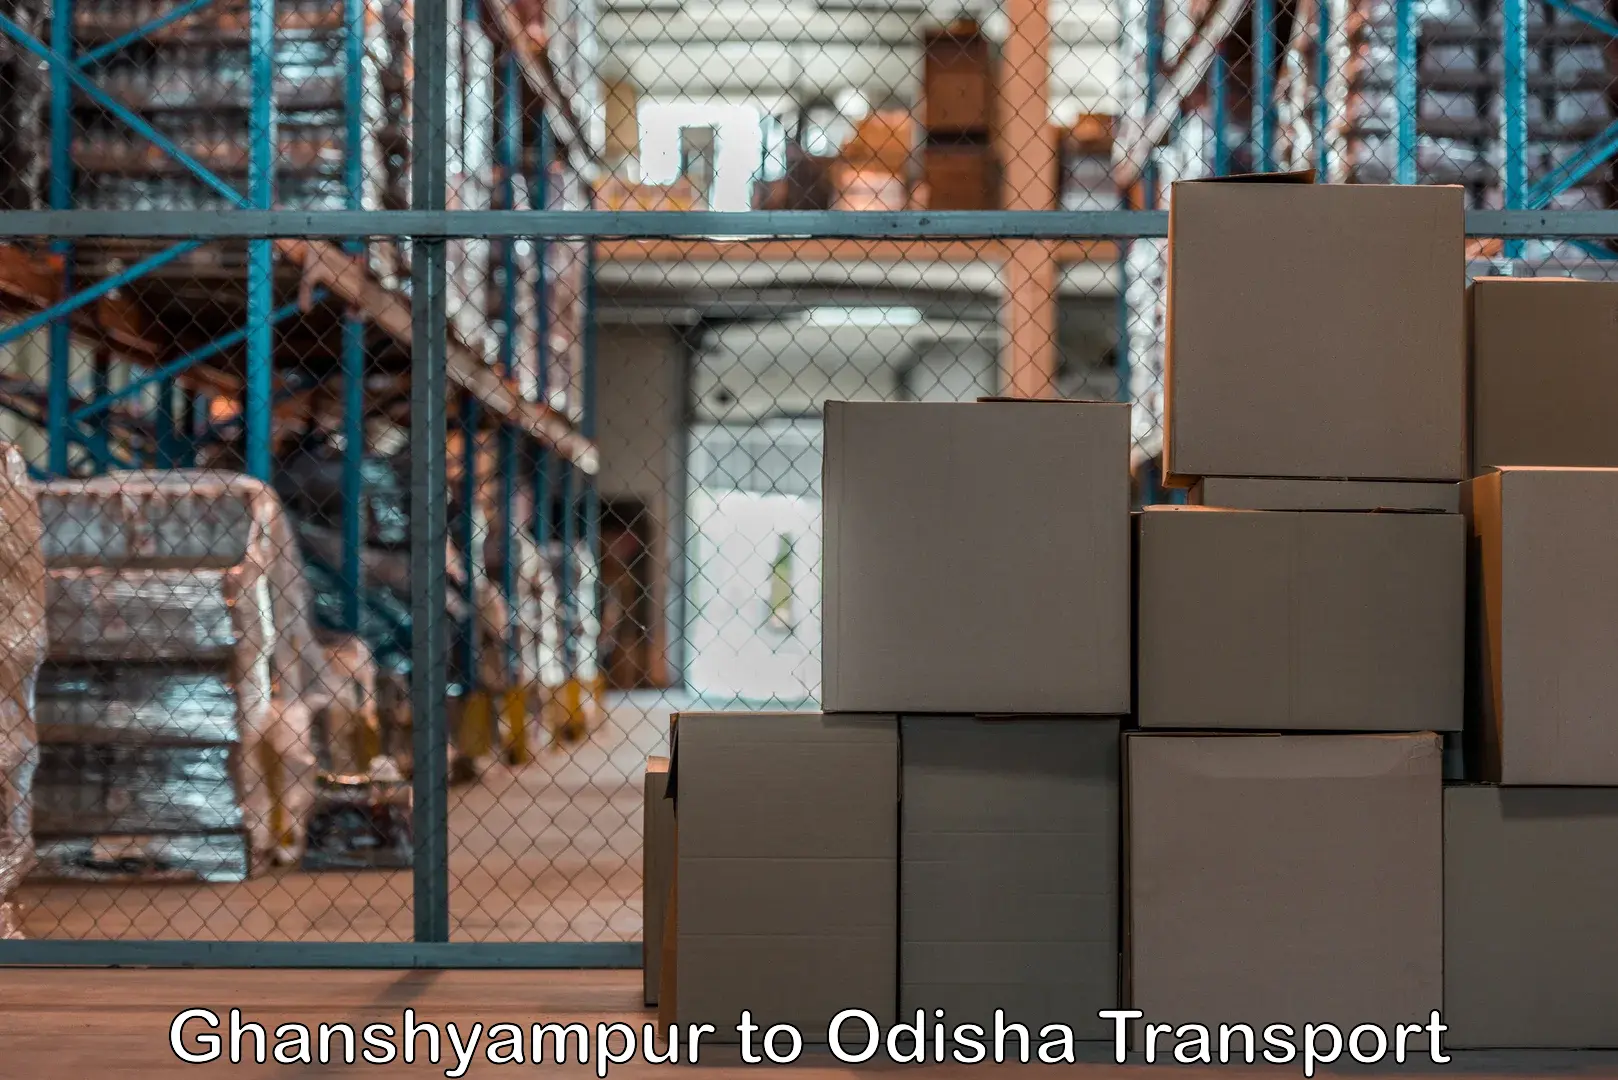 Cargo transport services in Ghanshyampur to Kendrapara